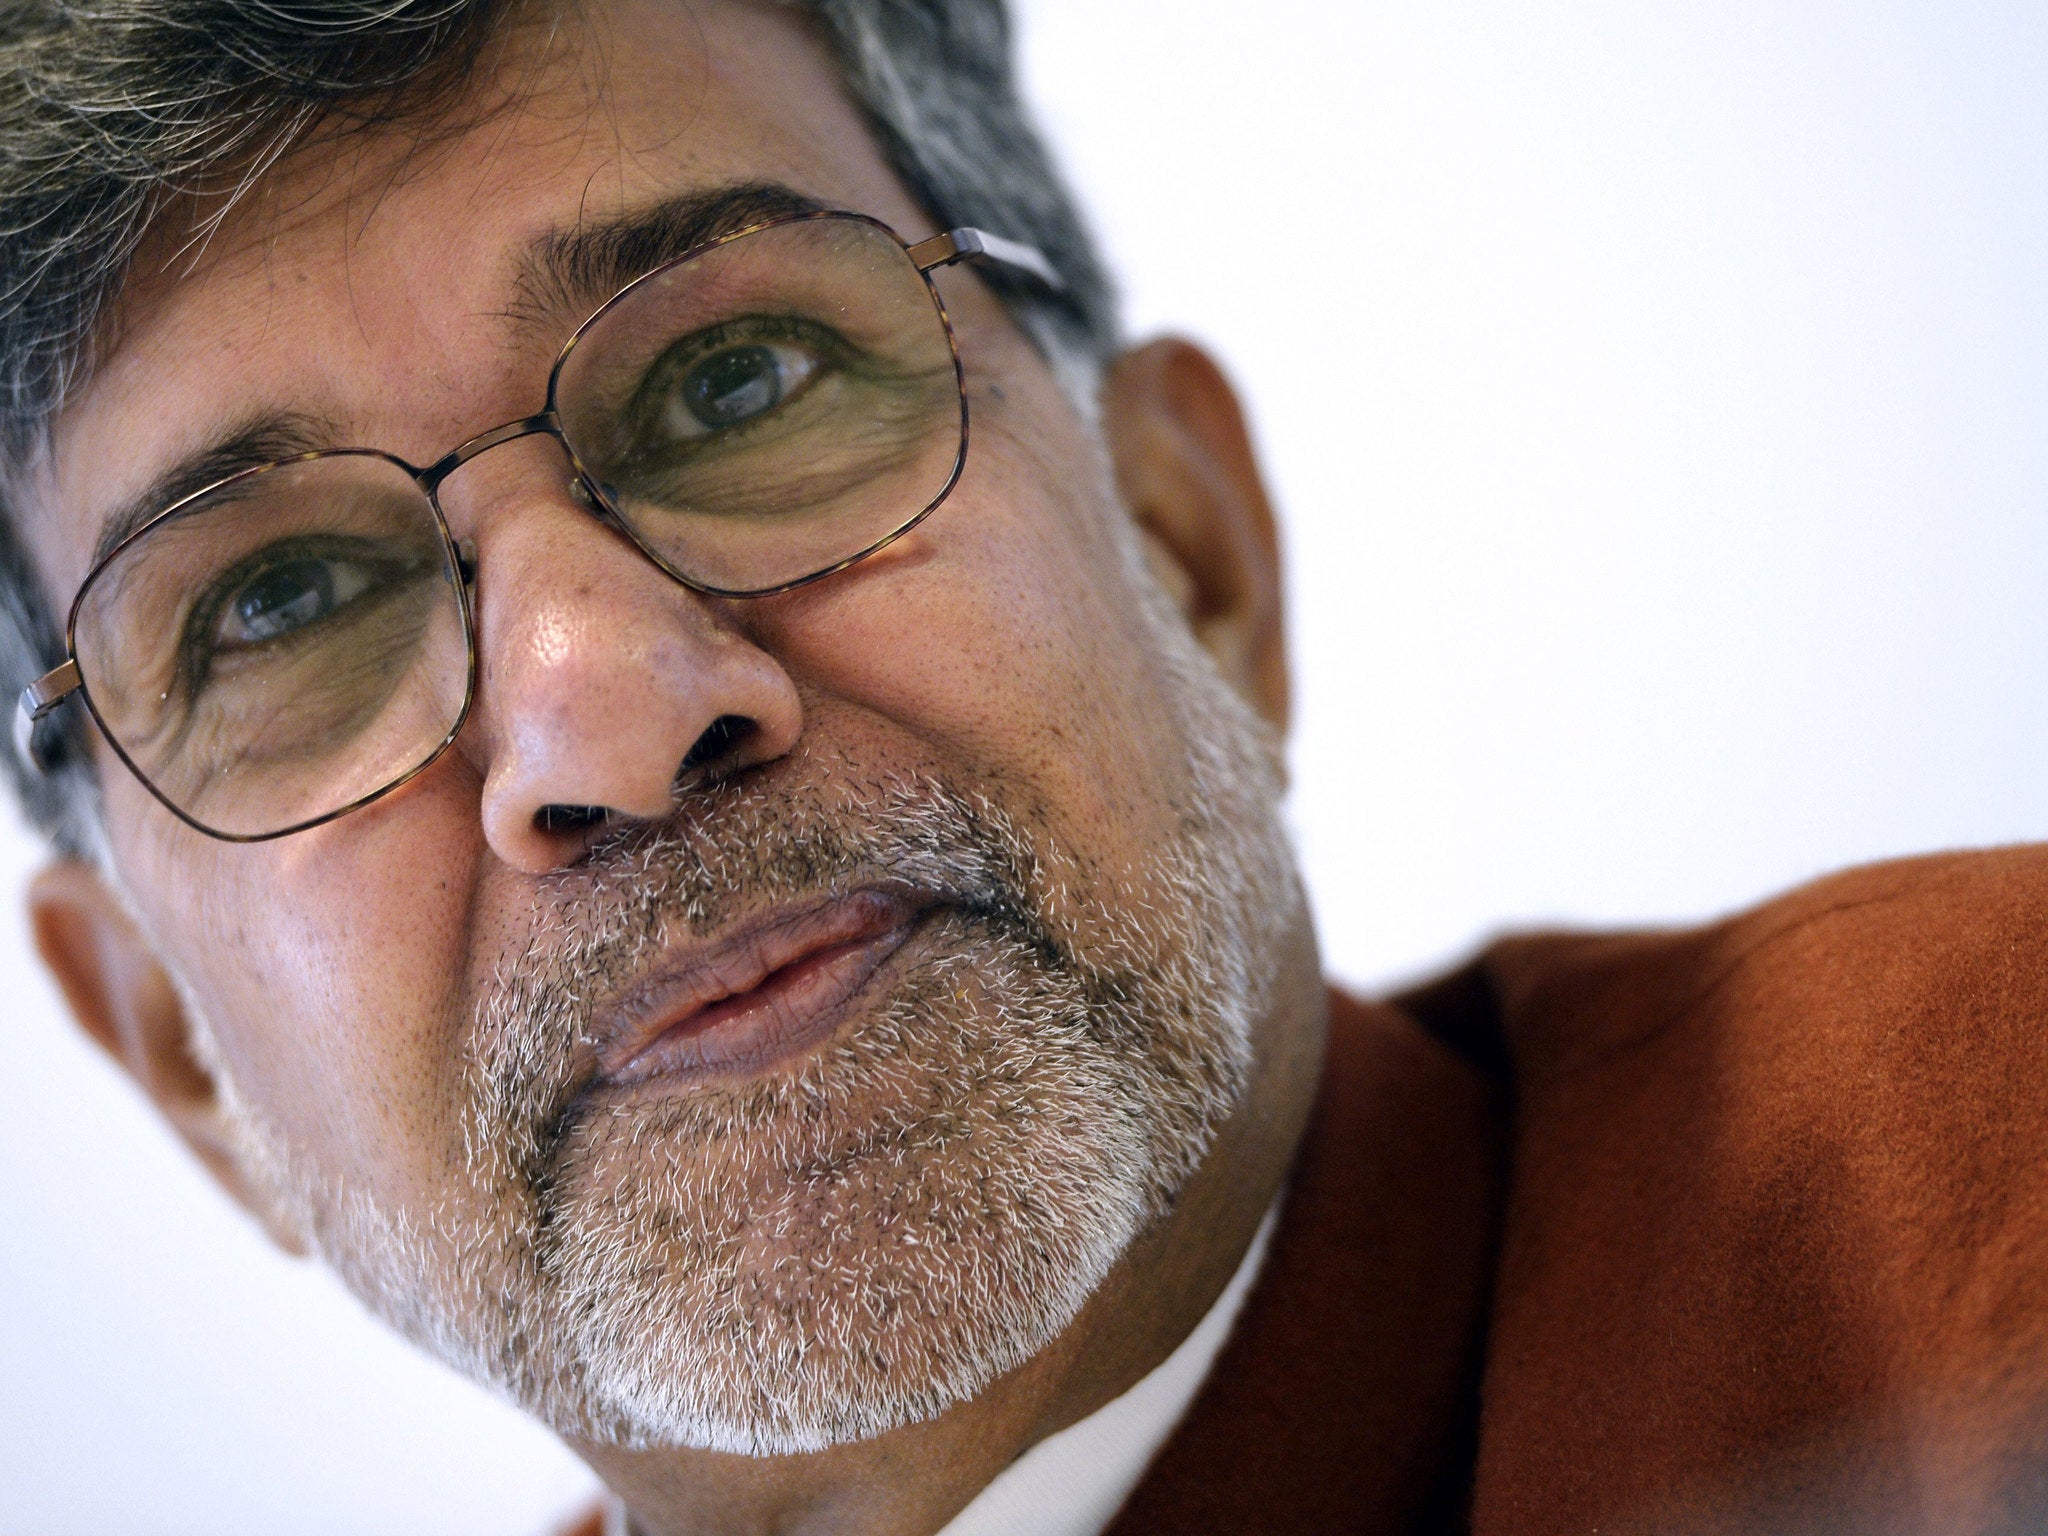 Nobel Peace Prize winner Kailash Satyarthi warned that there could be 500,000 child soldiers in the world